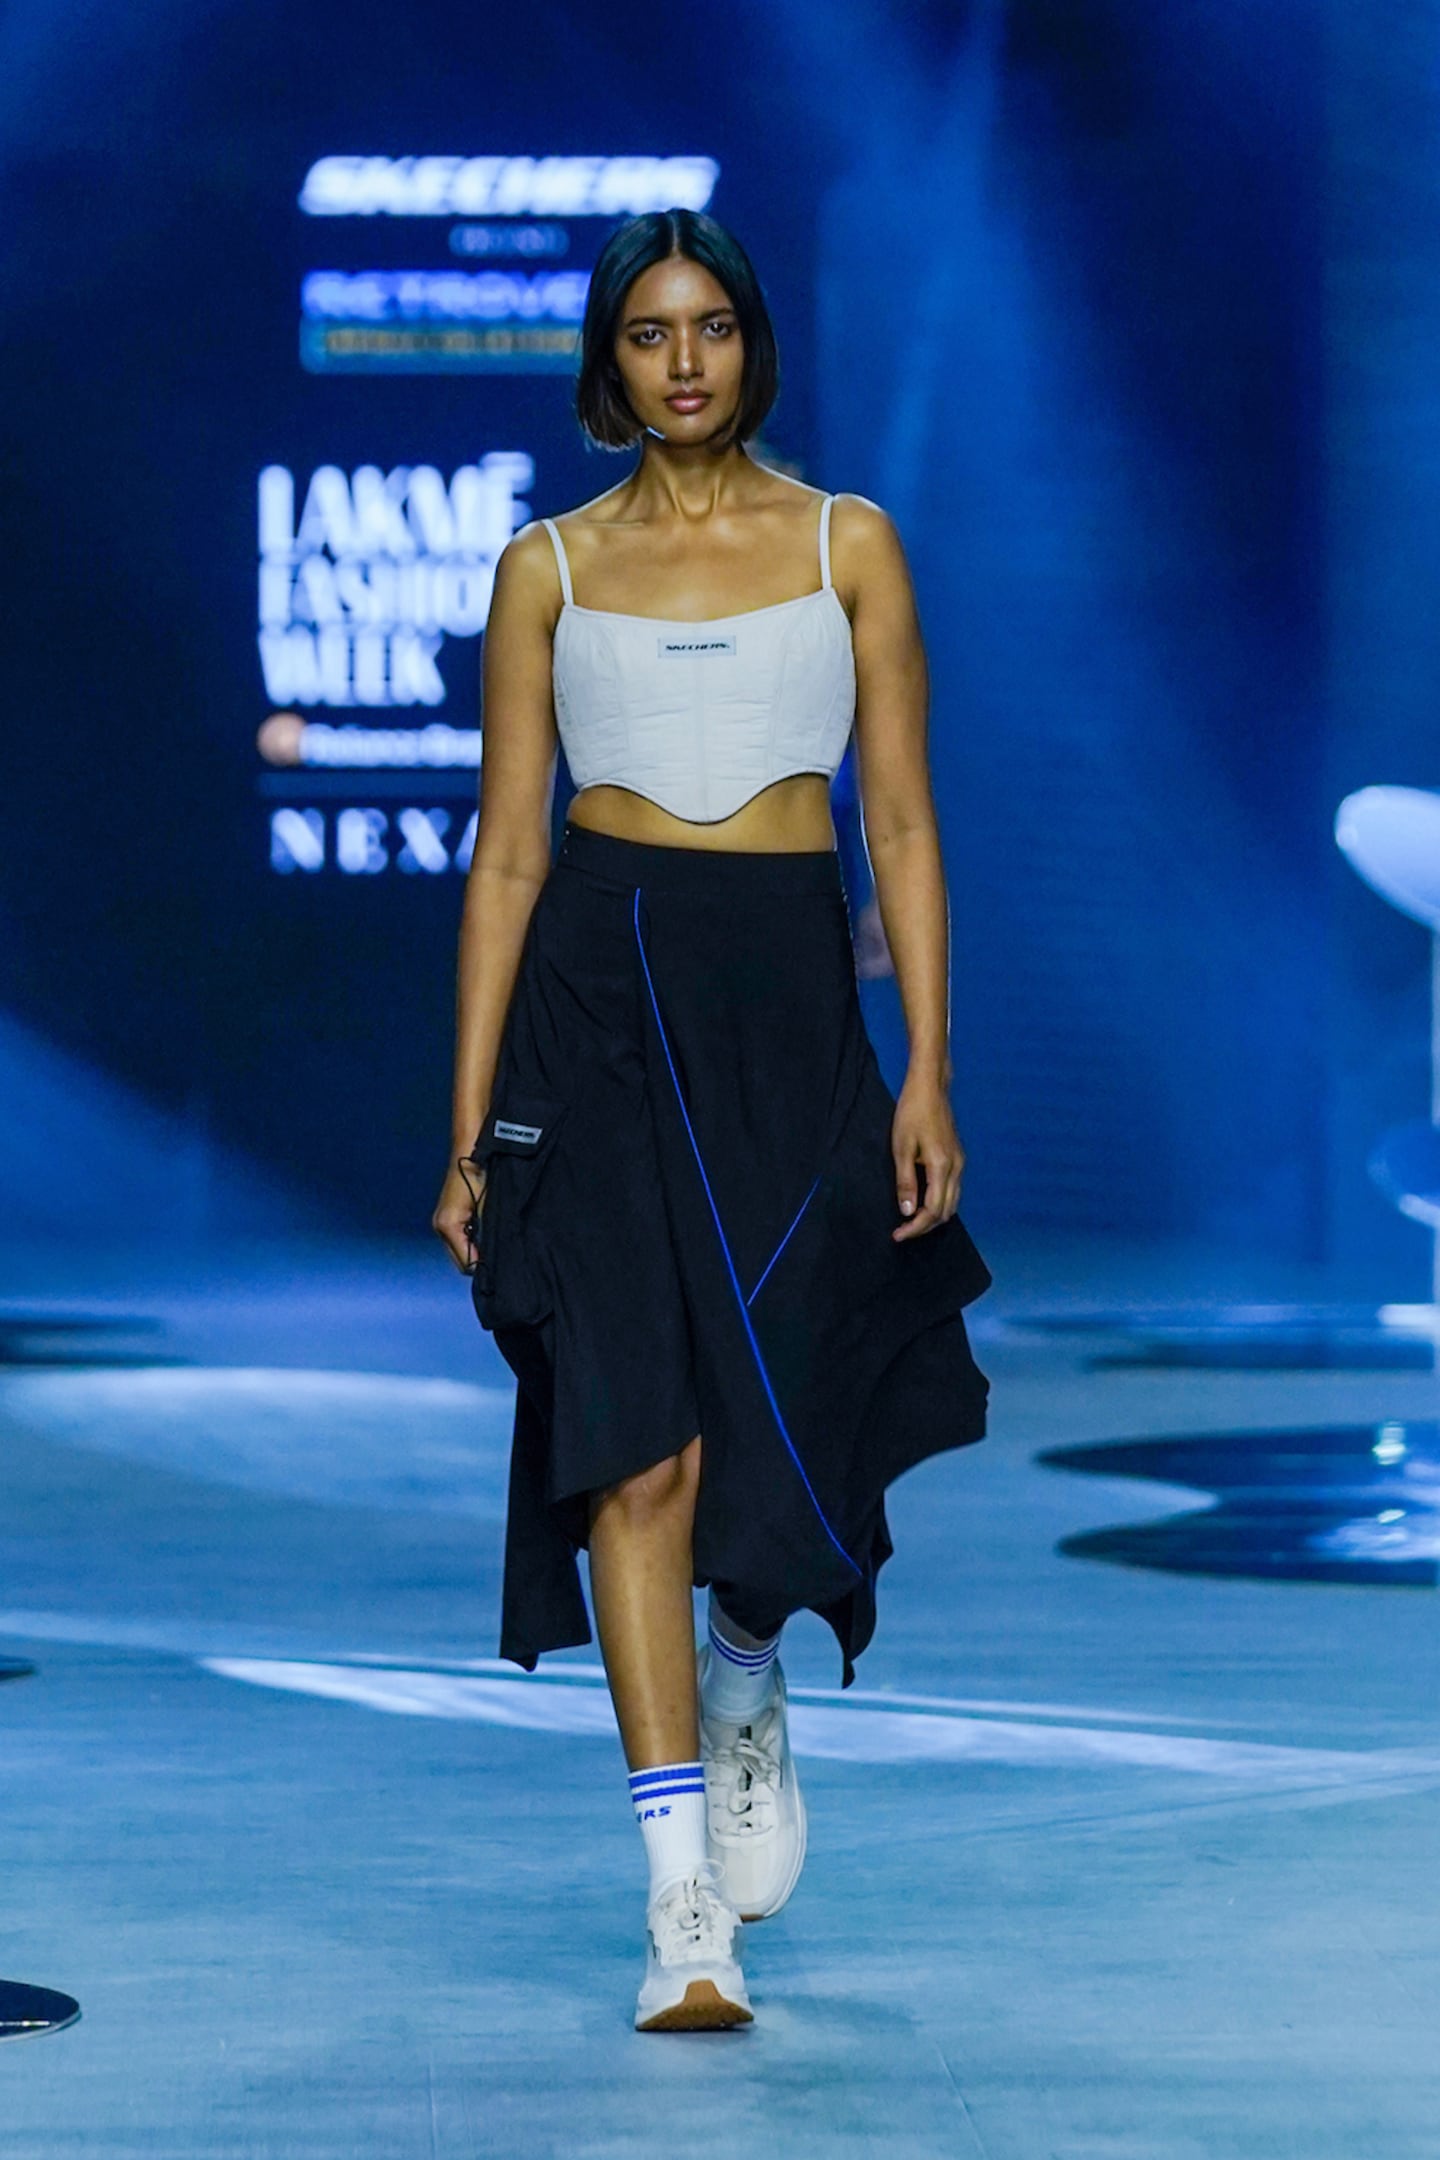 Skechers debuted a streetwear capsule collection designed by Indian designer Kanika Goyal at the latest edition of the biannual Lakme Fashion week.